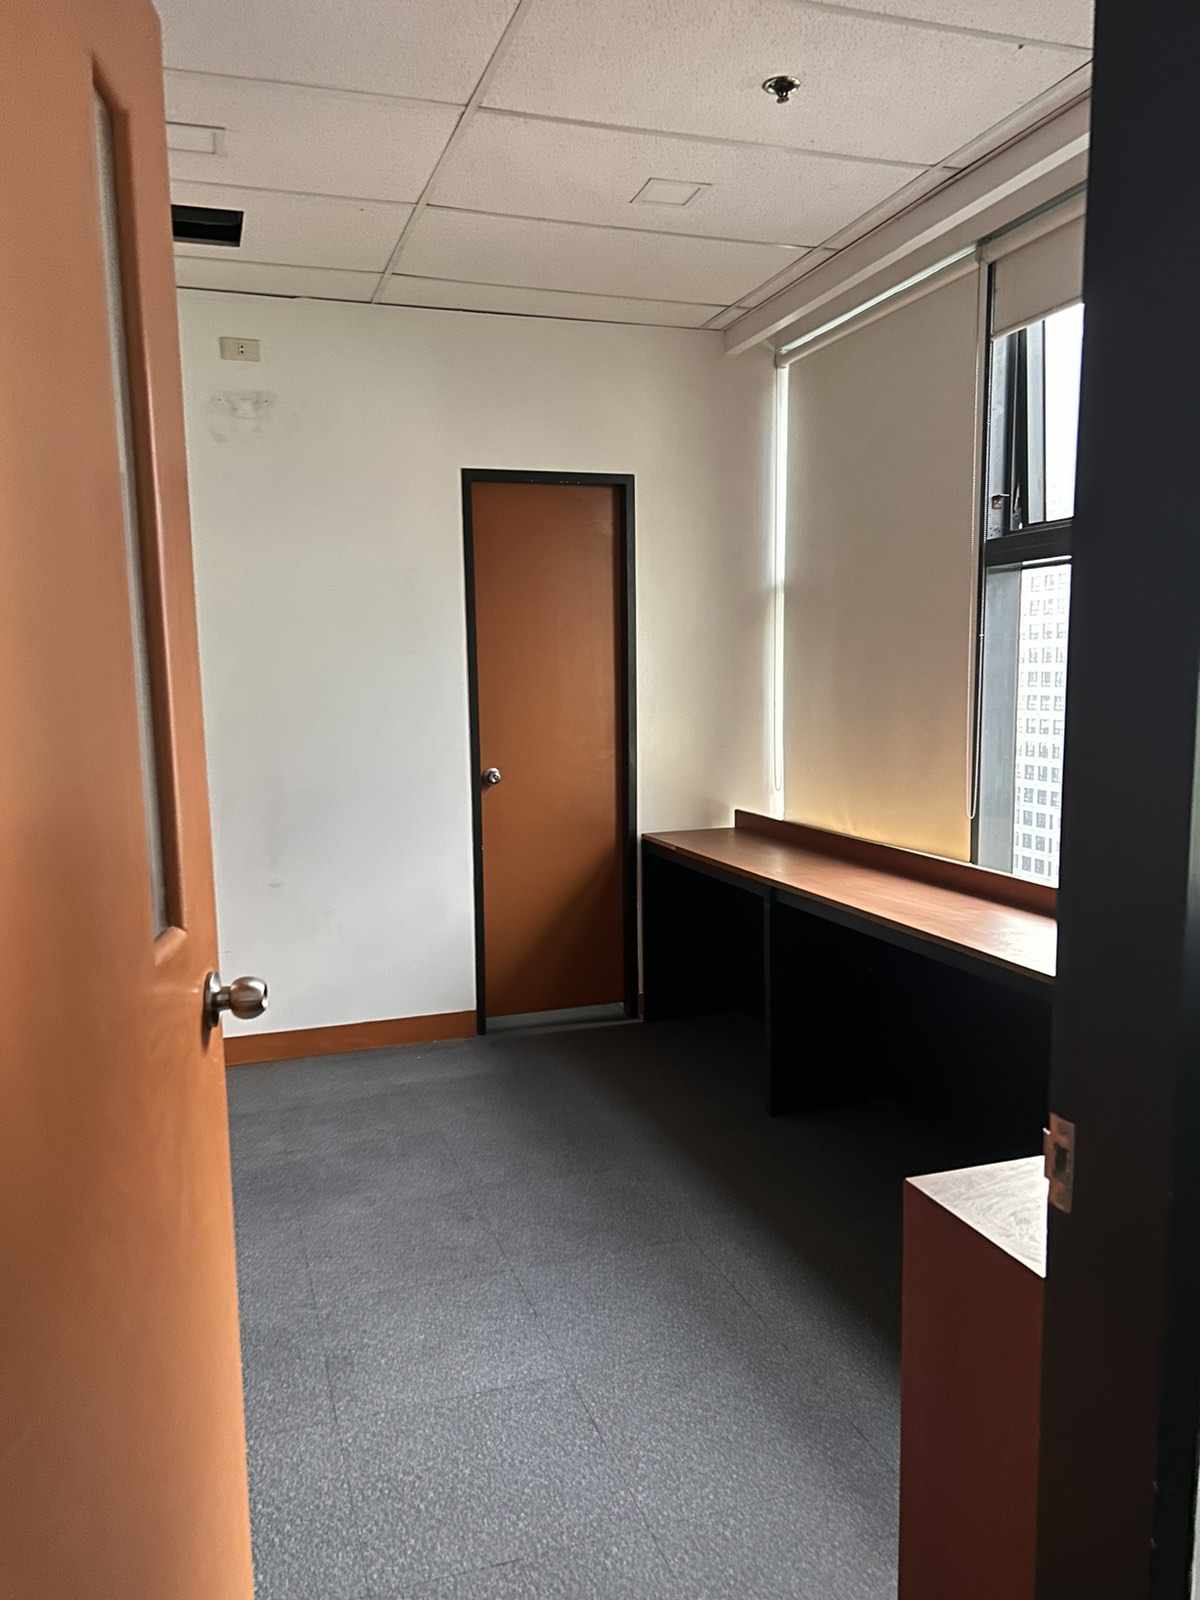 For Rent Lease Semi Furnished 229 sqm Office Space Ortigas